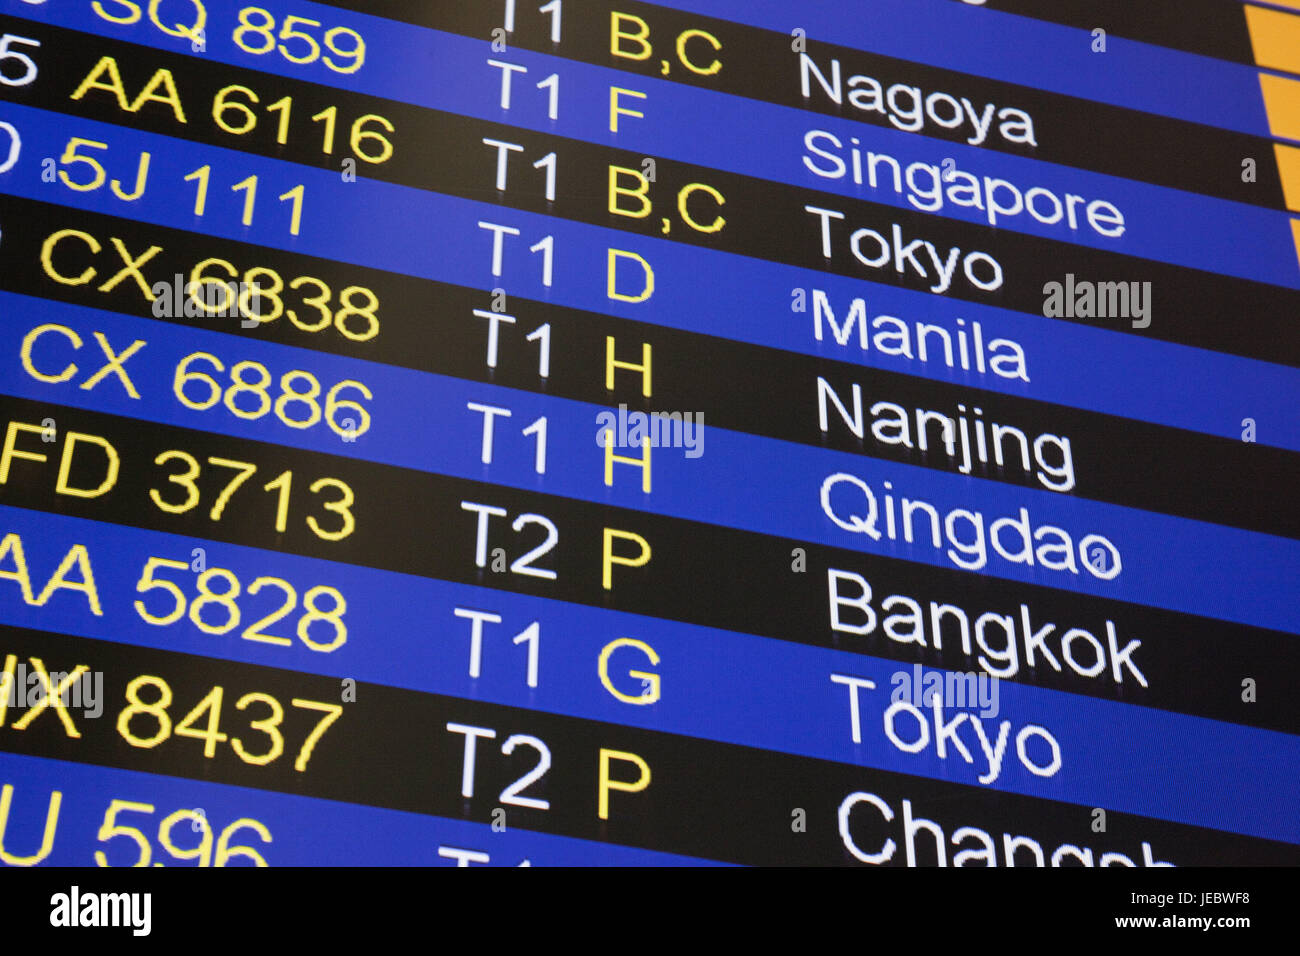 China, Hong Kong, airport, times of departure, Asia, information, takeoff, information, time, towns, transport, inside, tourism, travel, journey by air, flight times, Stock Photo